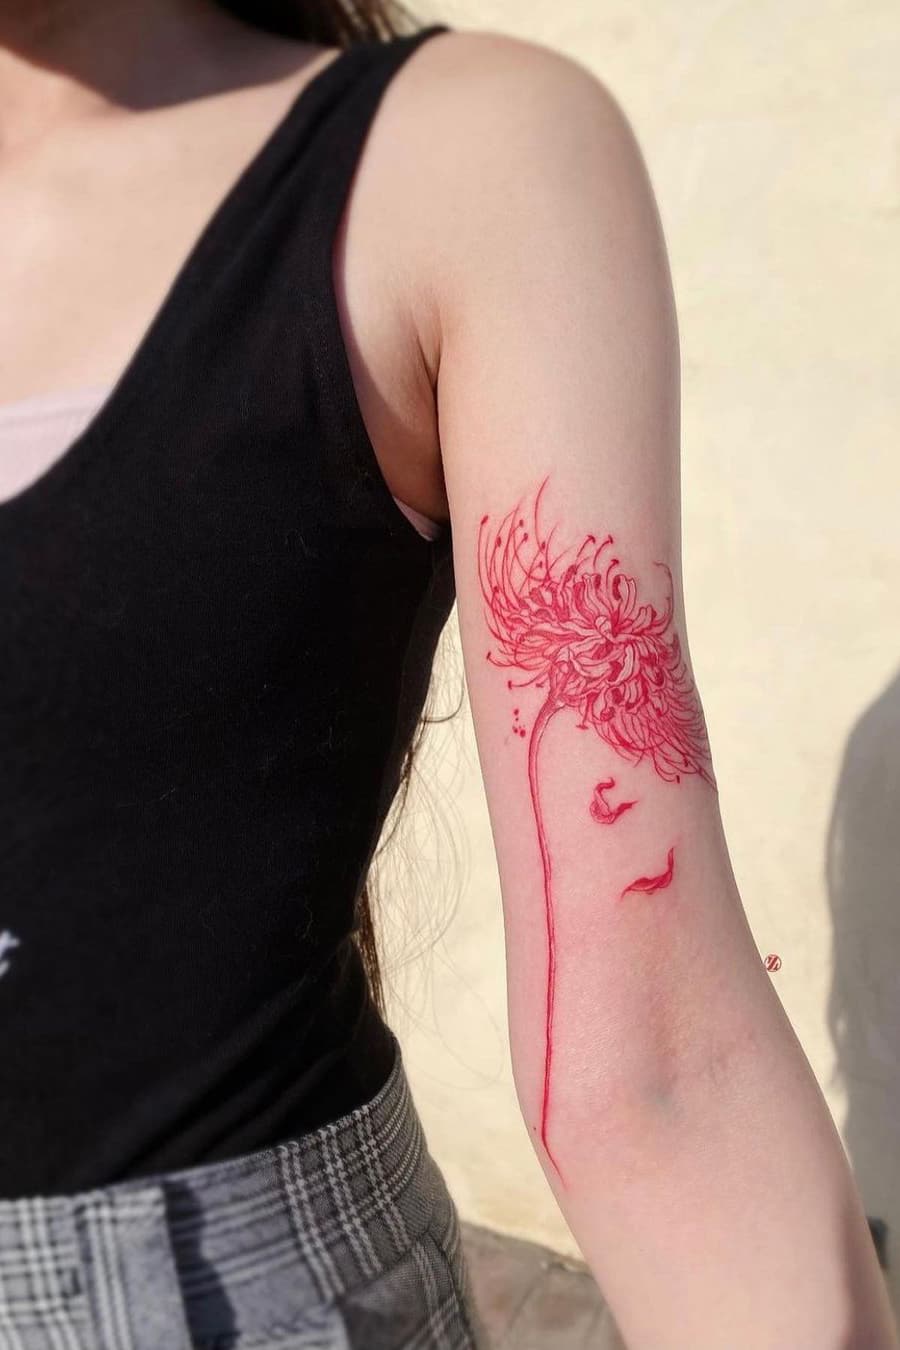 Red spider lily tattoo